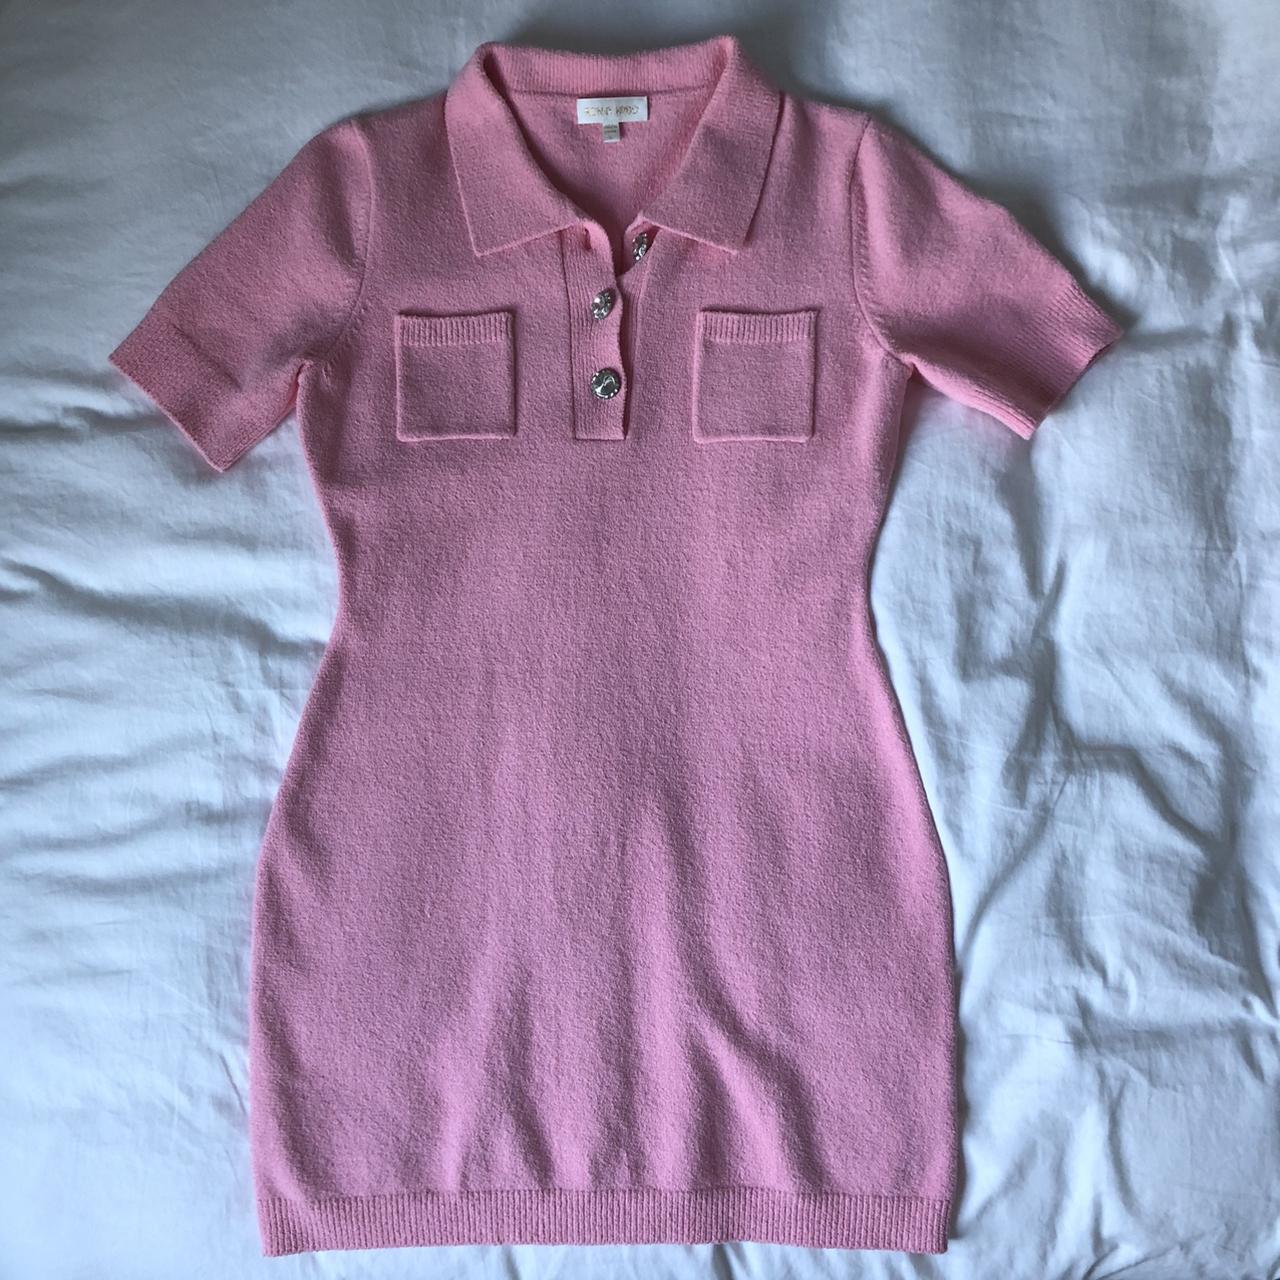 Ronny Kobo Pink Dress with Jewel Button Large but is... - Depop